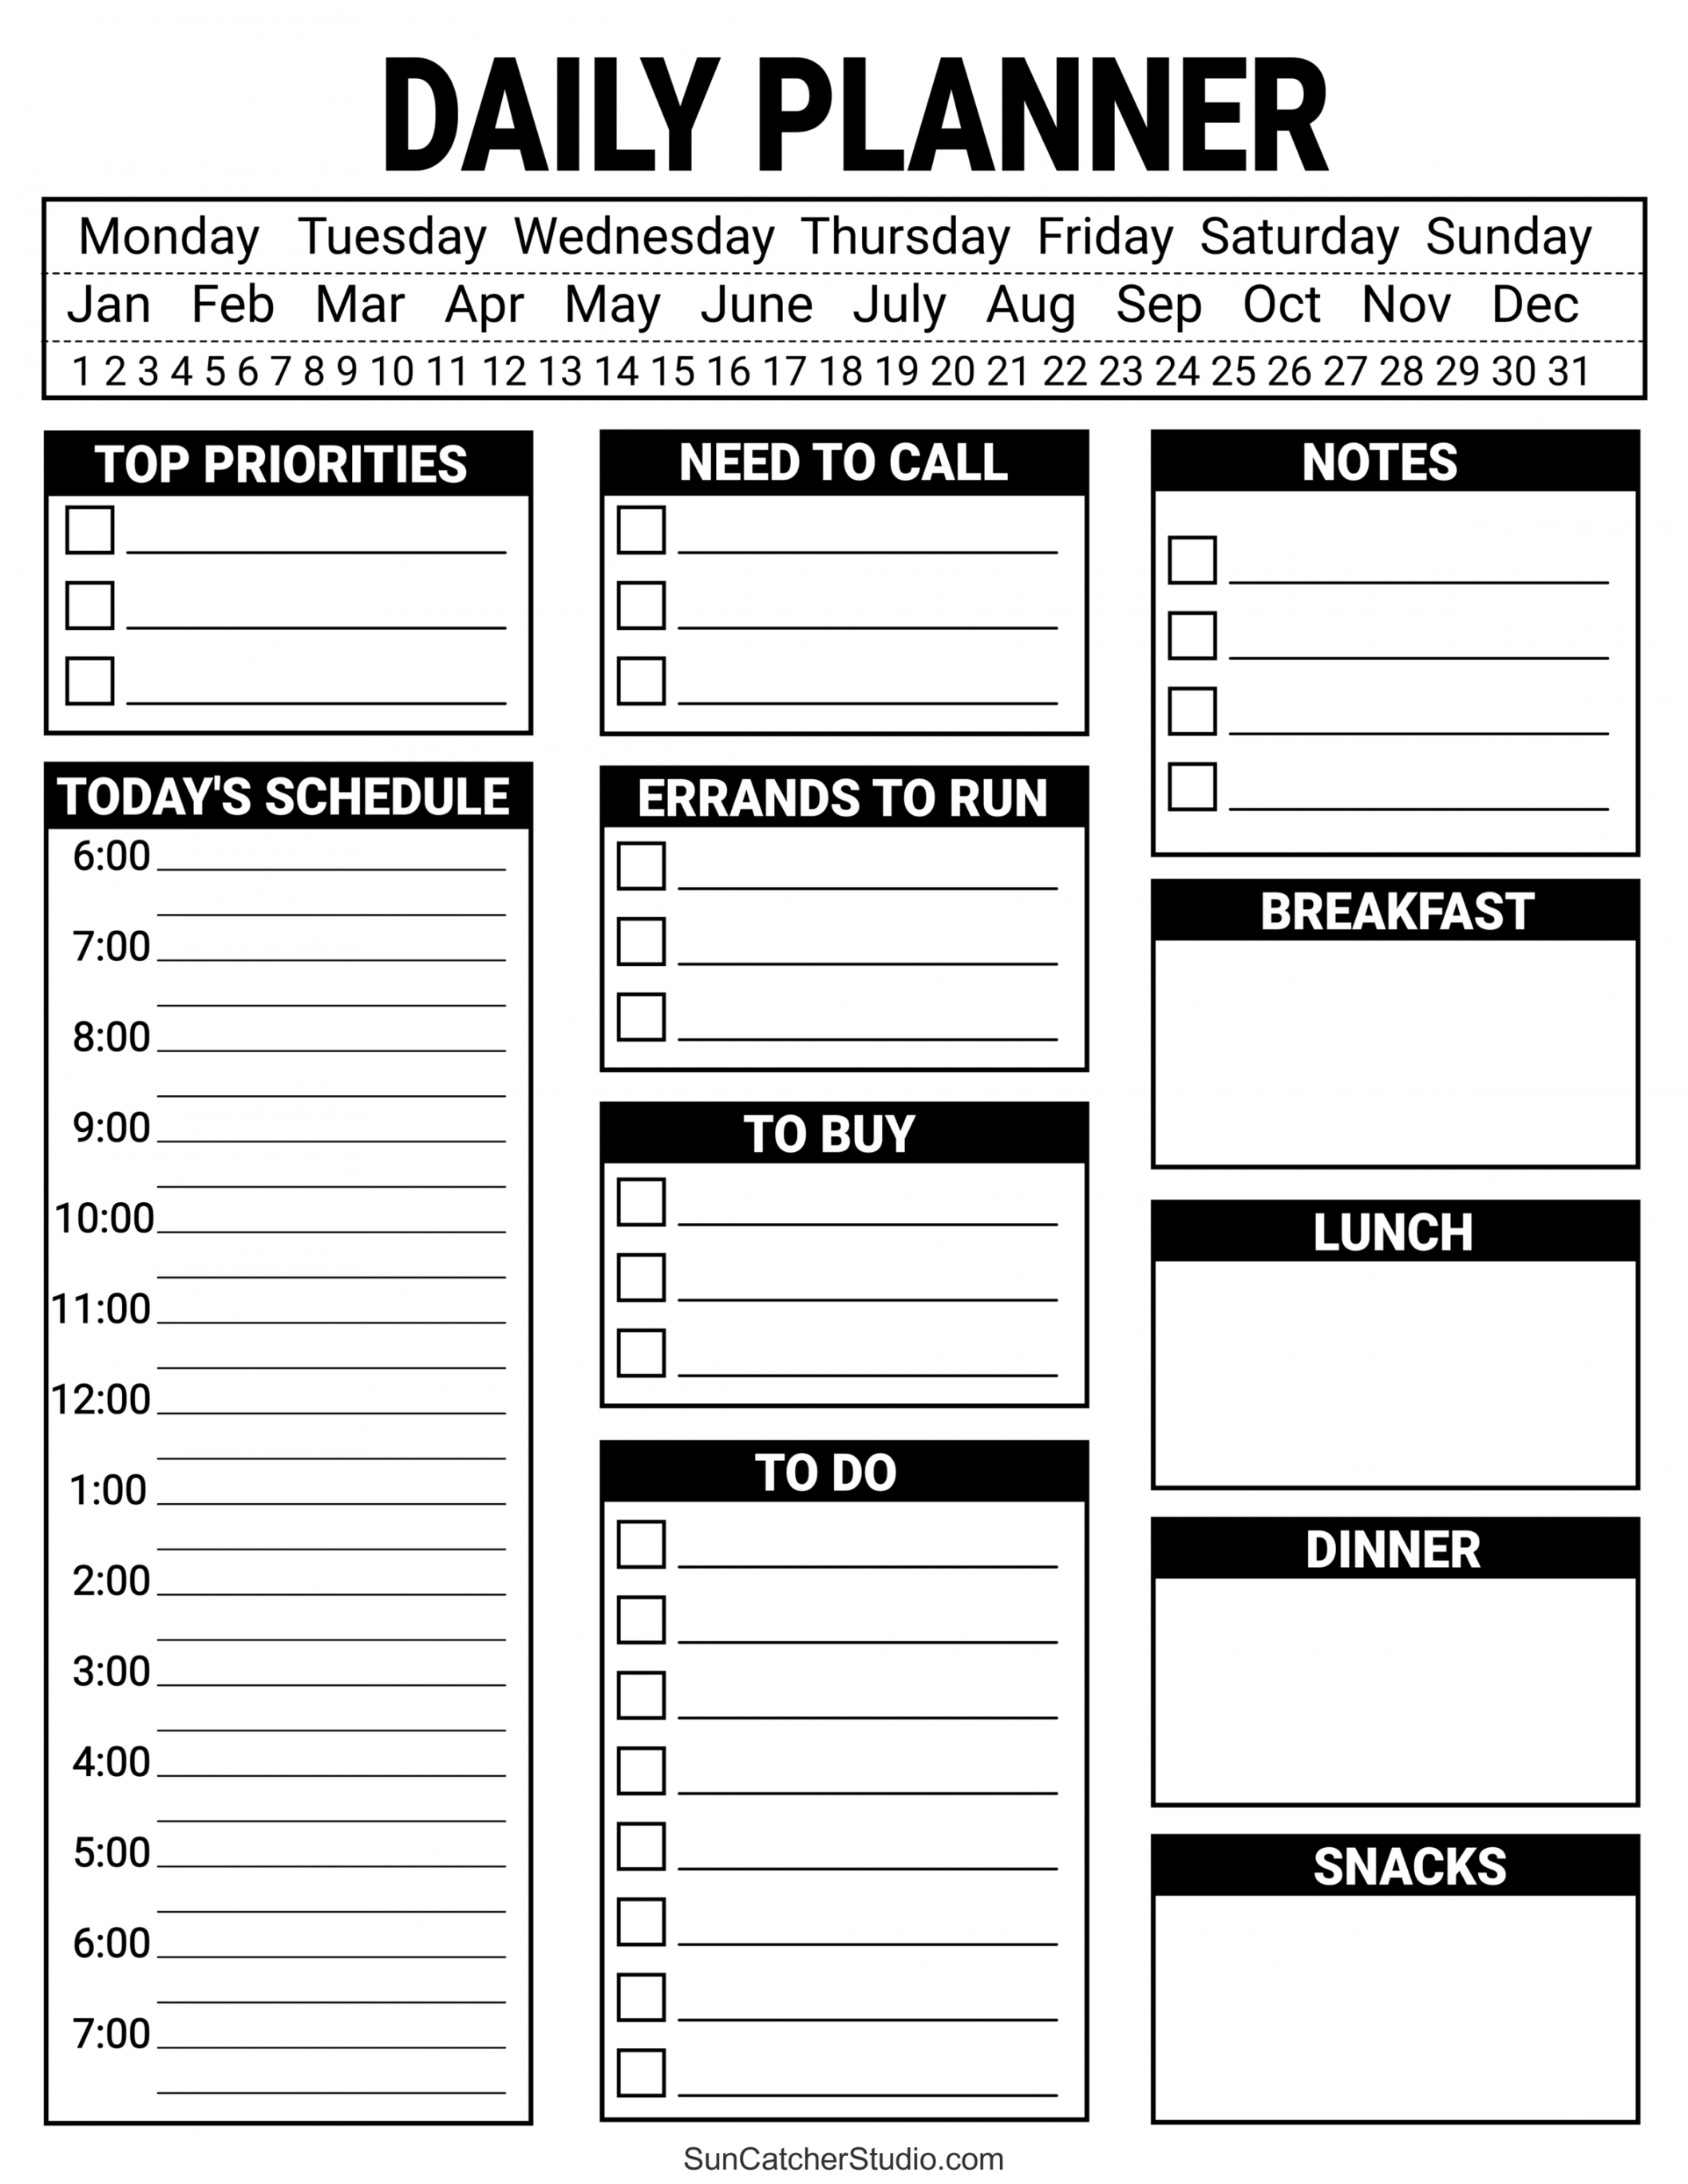 Free Printable To Do Lists To Get Organized - Printable - To Do List (Free Printable PDF Templates) – Things To Do – DIY